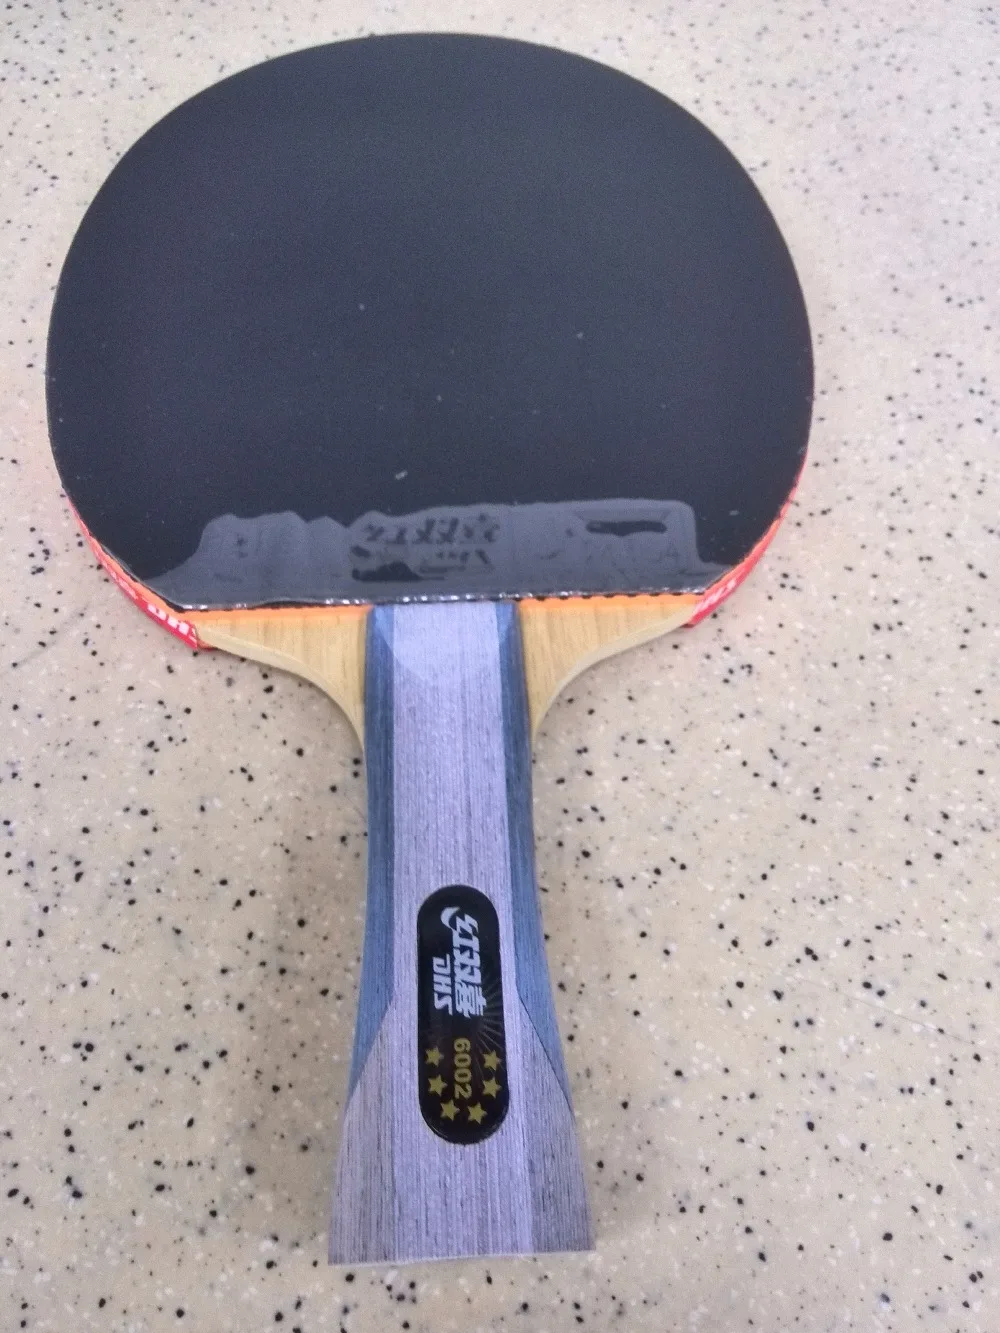 Racket DHS R6002 w/ 5 gifts Paddle Table Tennis 6Star Long Handle Bat Ping Pong 